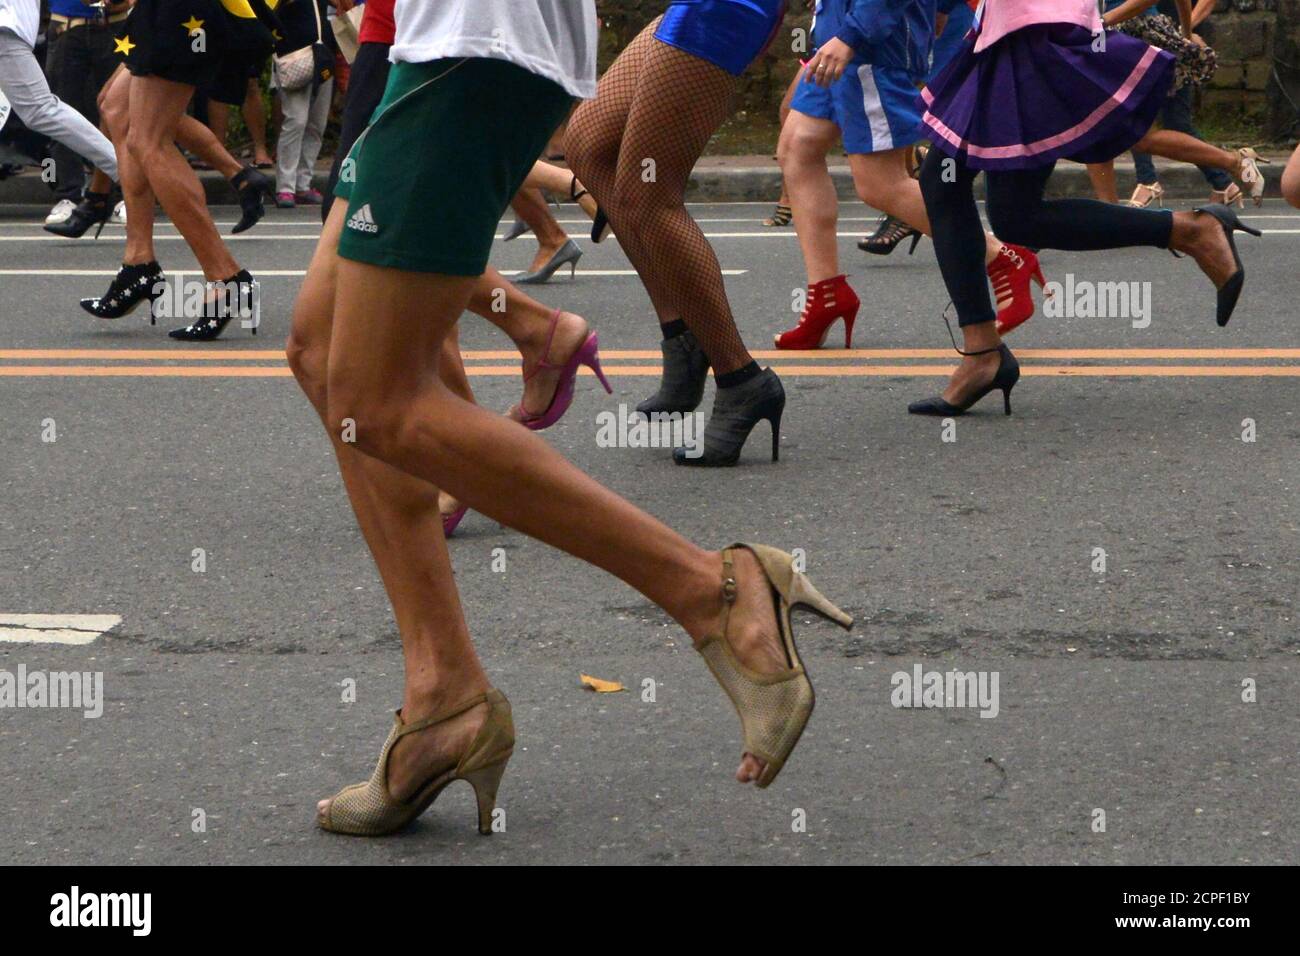 Participants wearing stilettos run as they compete in the "Tour De Takong" stiletto  race, as part of activities for the town's annual shoe festival, along Shoe  Avenue in Marikina city, Metro Manila,